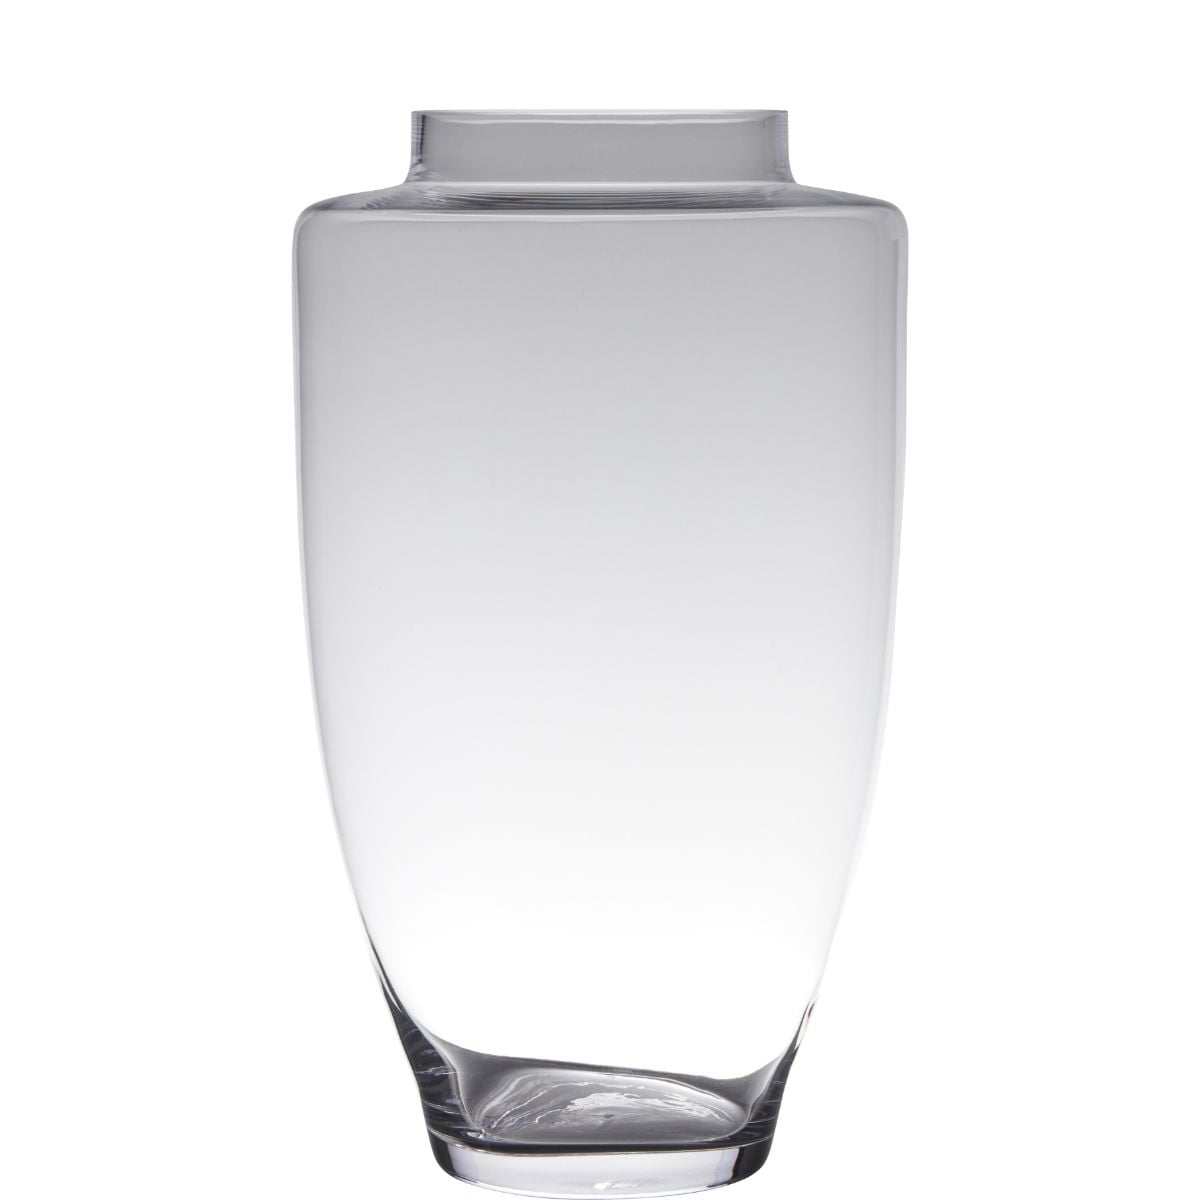 CONTEMPORARY CLEAR GLASS VASE STRAIGHT VASE 